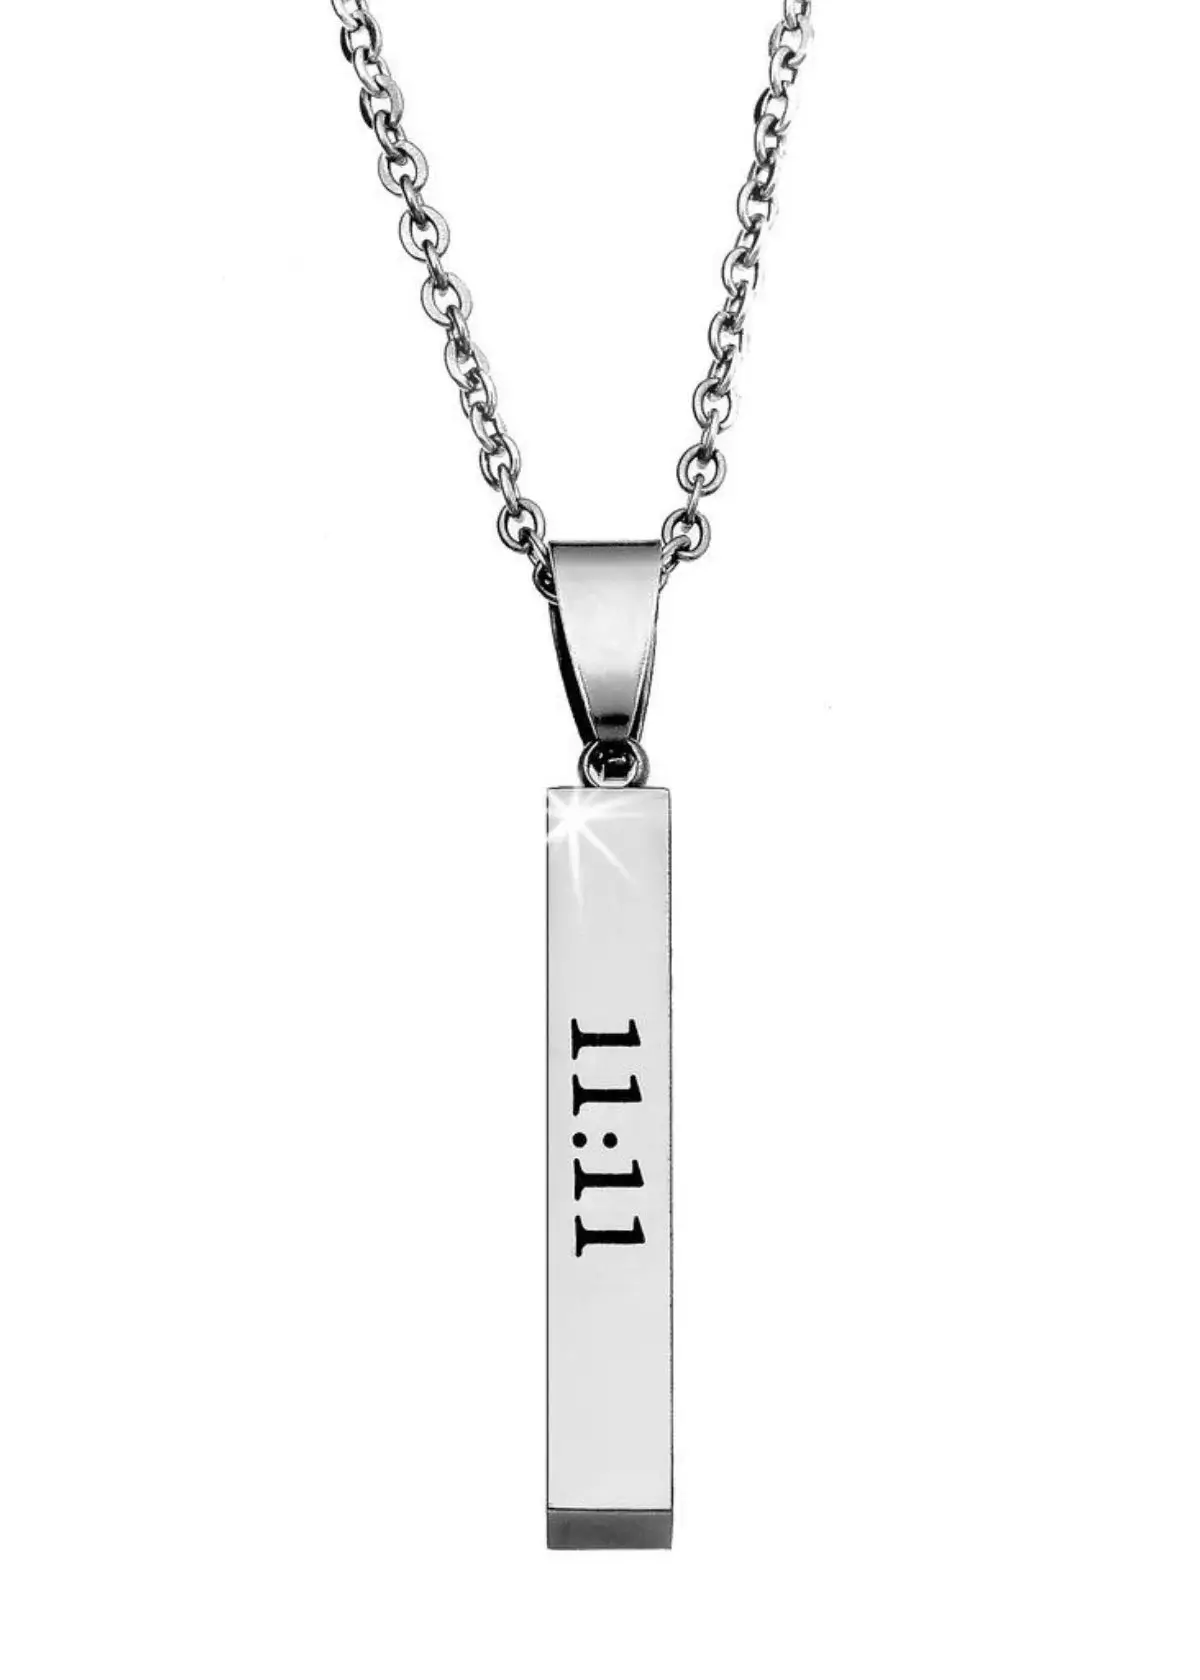 What does an 11 11 necklace symbolize?